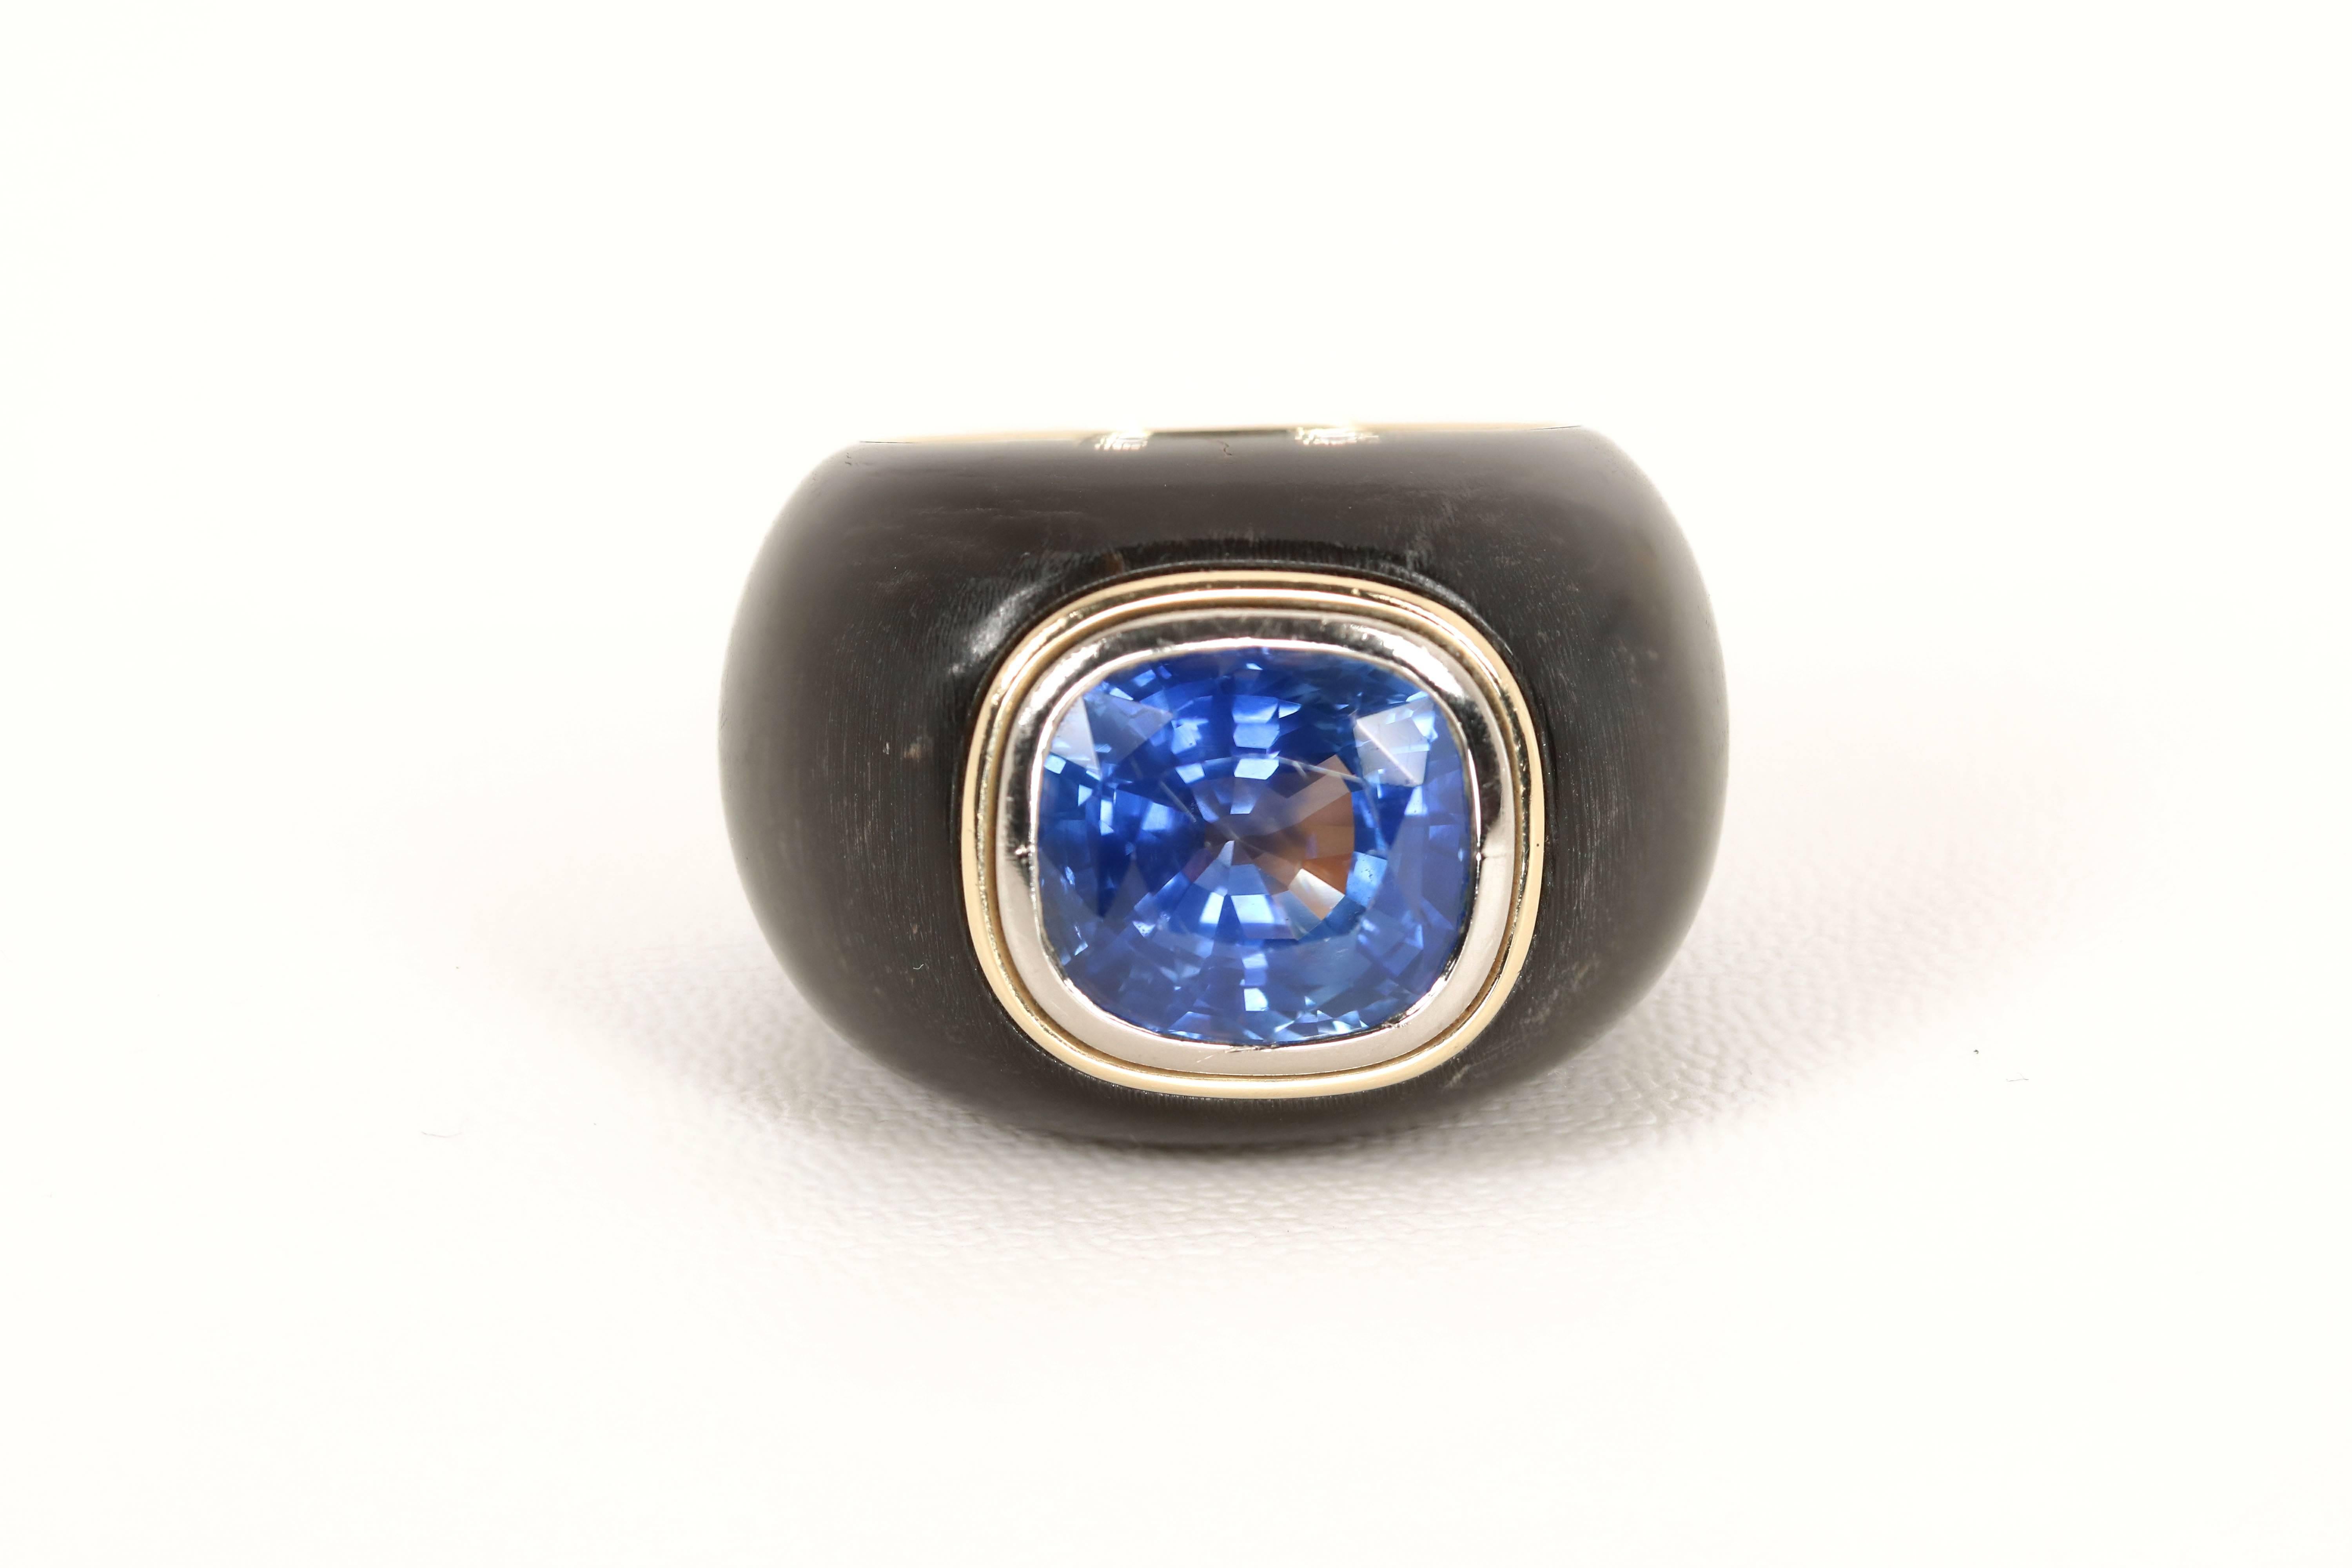 18K yellow and white gold bombé designed wood ring, set with an cushion cut sapphire of approximately 13 carats

AGL Certificate 